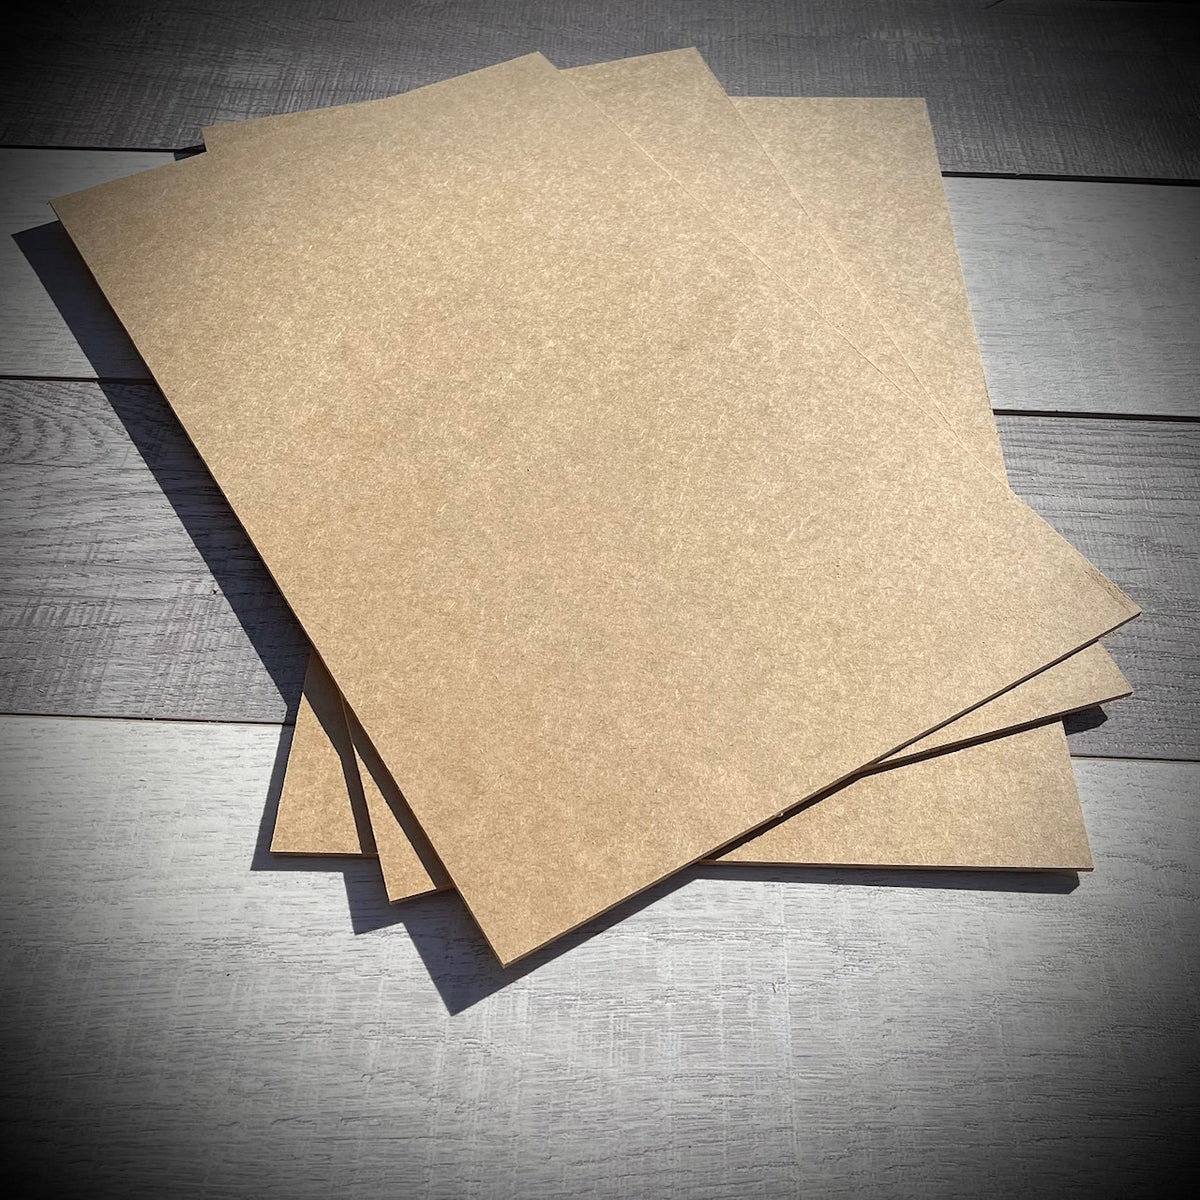 1/8 MDF for Glowforge or Laser, 20 sheets